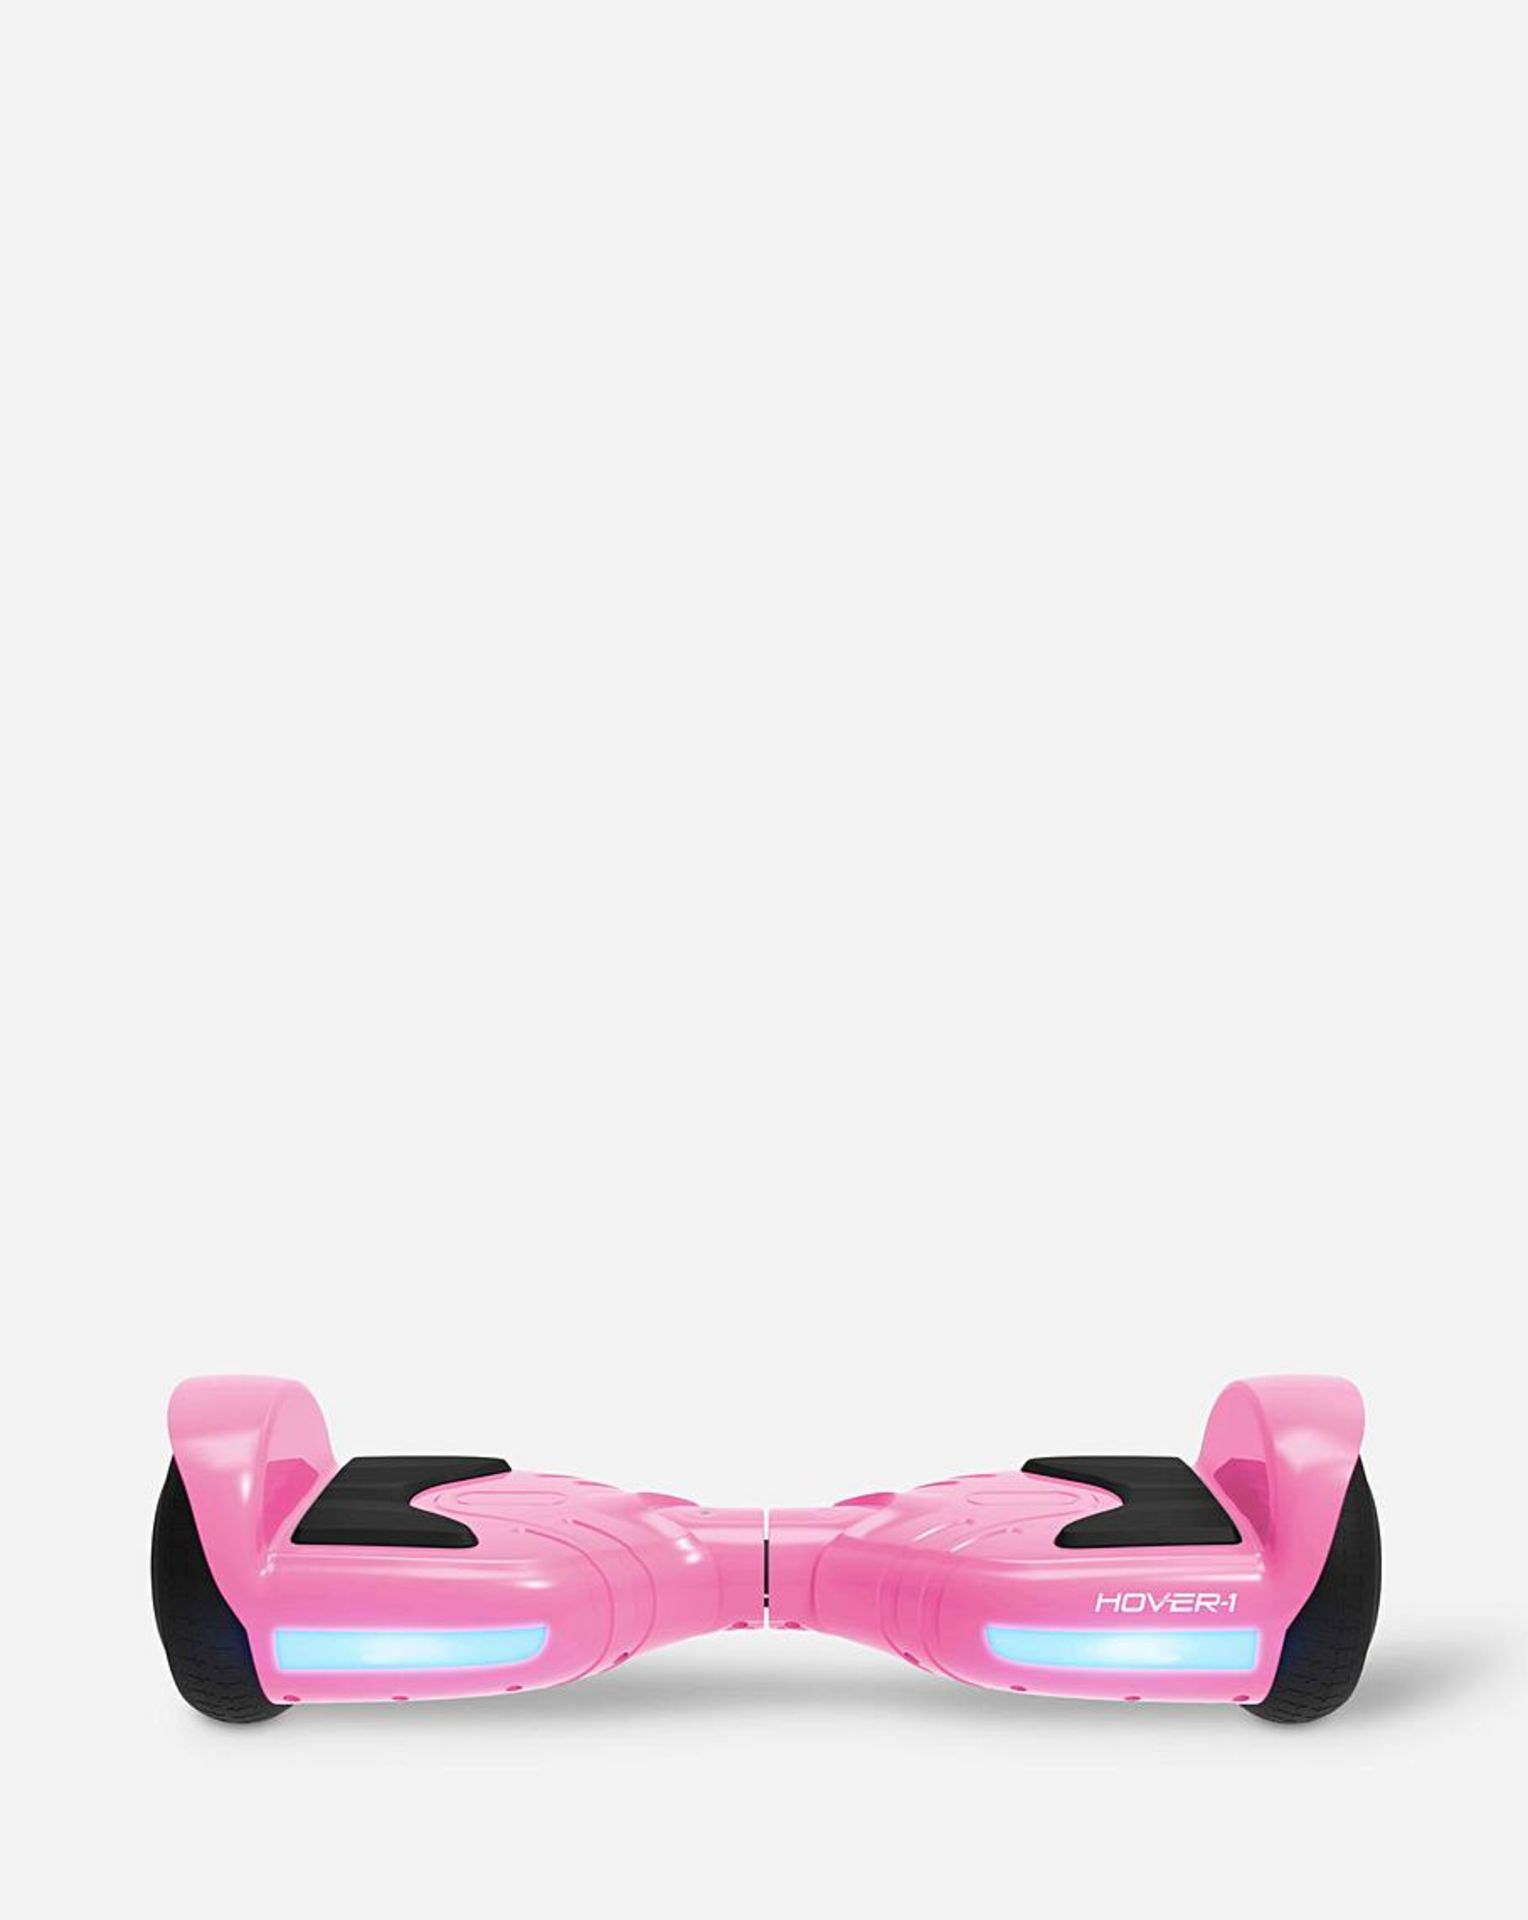 Hover-1 Rival Kids Hoverboard Pink. Enjoy hours of fun with the Hover-1 Rival Hoverboard in Pink.